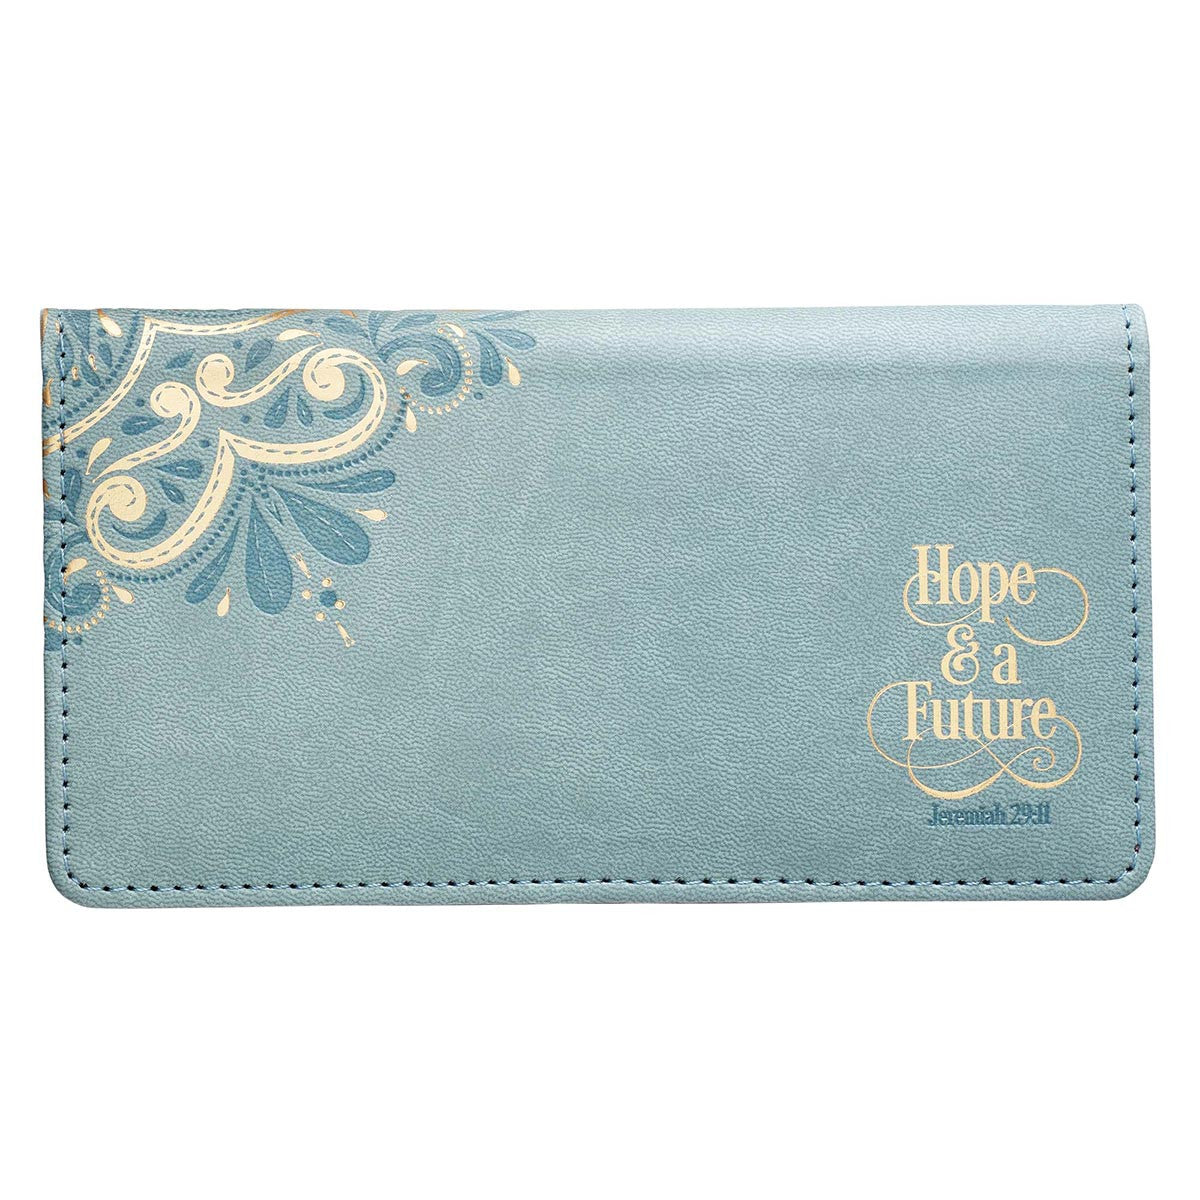 Hope & a Future Powder Blue Faux Leather Checkbook Cover - Jeremiah 29:11